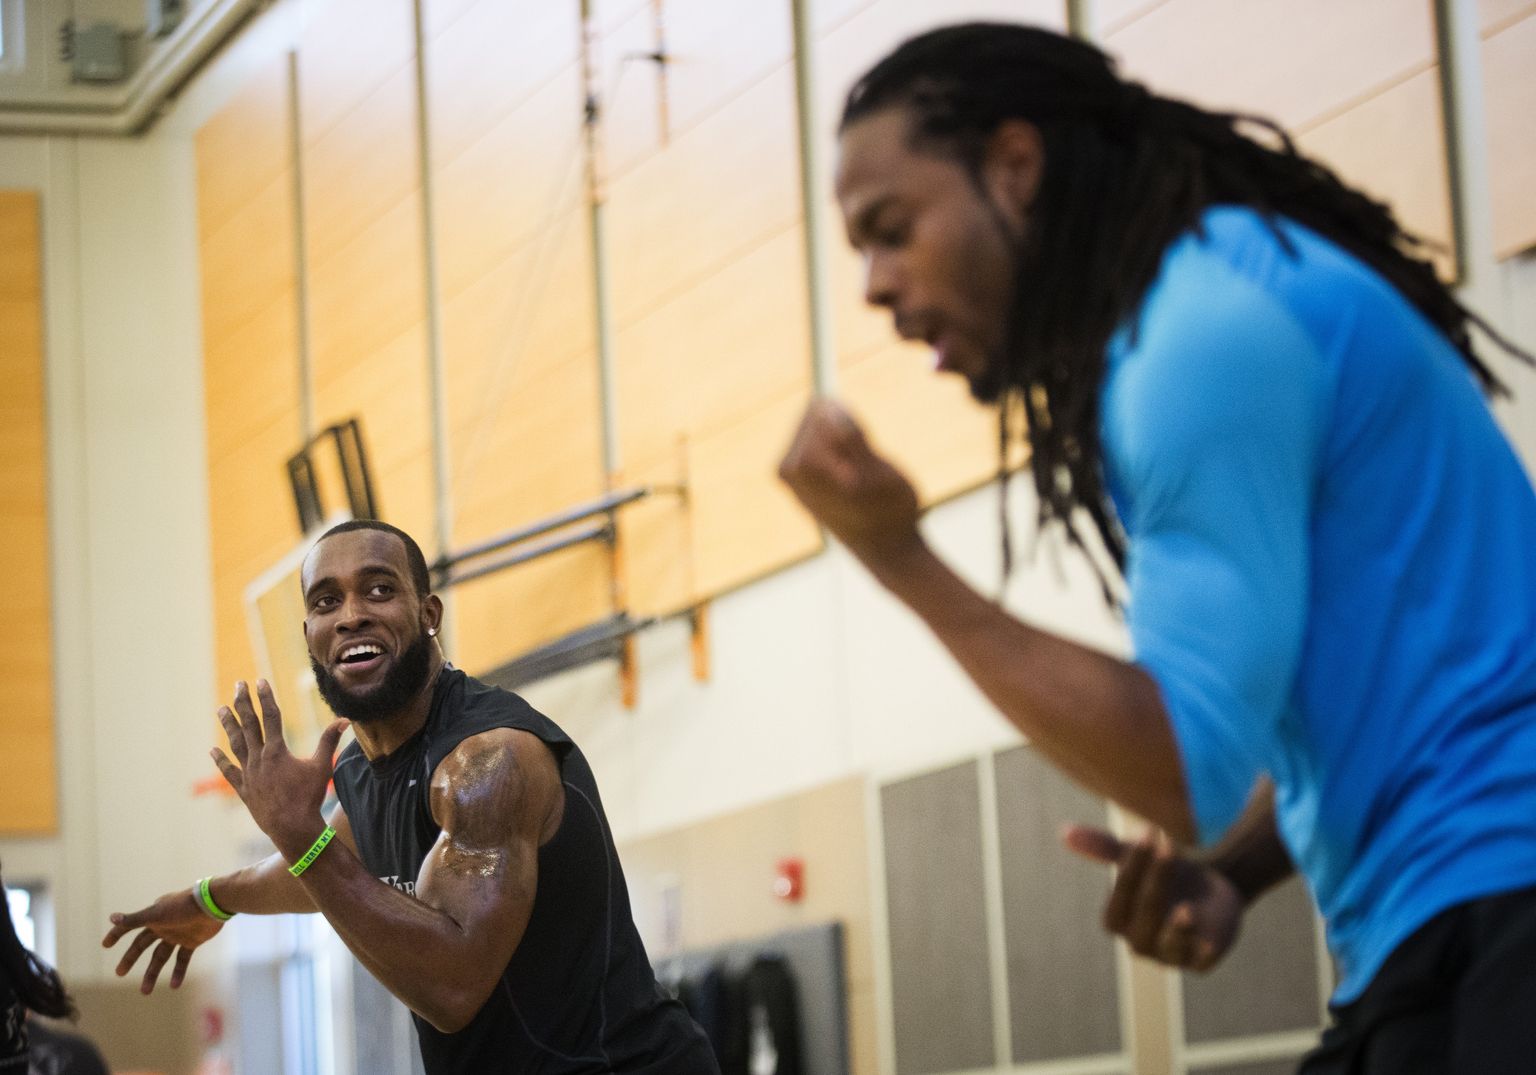 What it’s like to work out with Seahawks’ Kam Chancellor | The Seattle ...